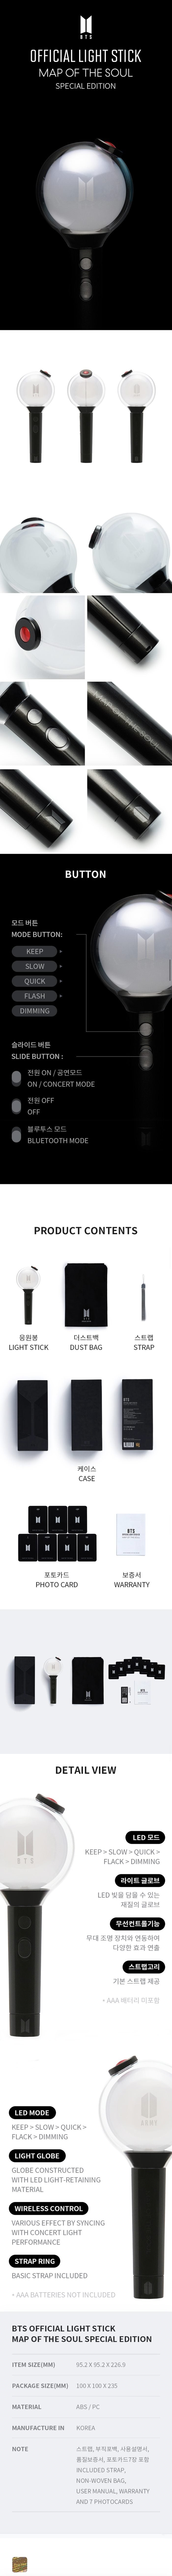 BTS Official Light Stick MAP OF THE SOUL SPECIAL EDITION ARMY BOMB